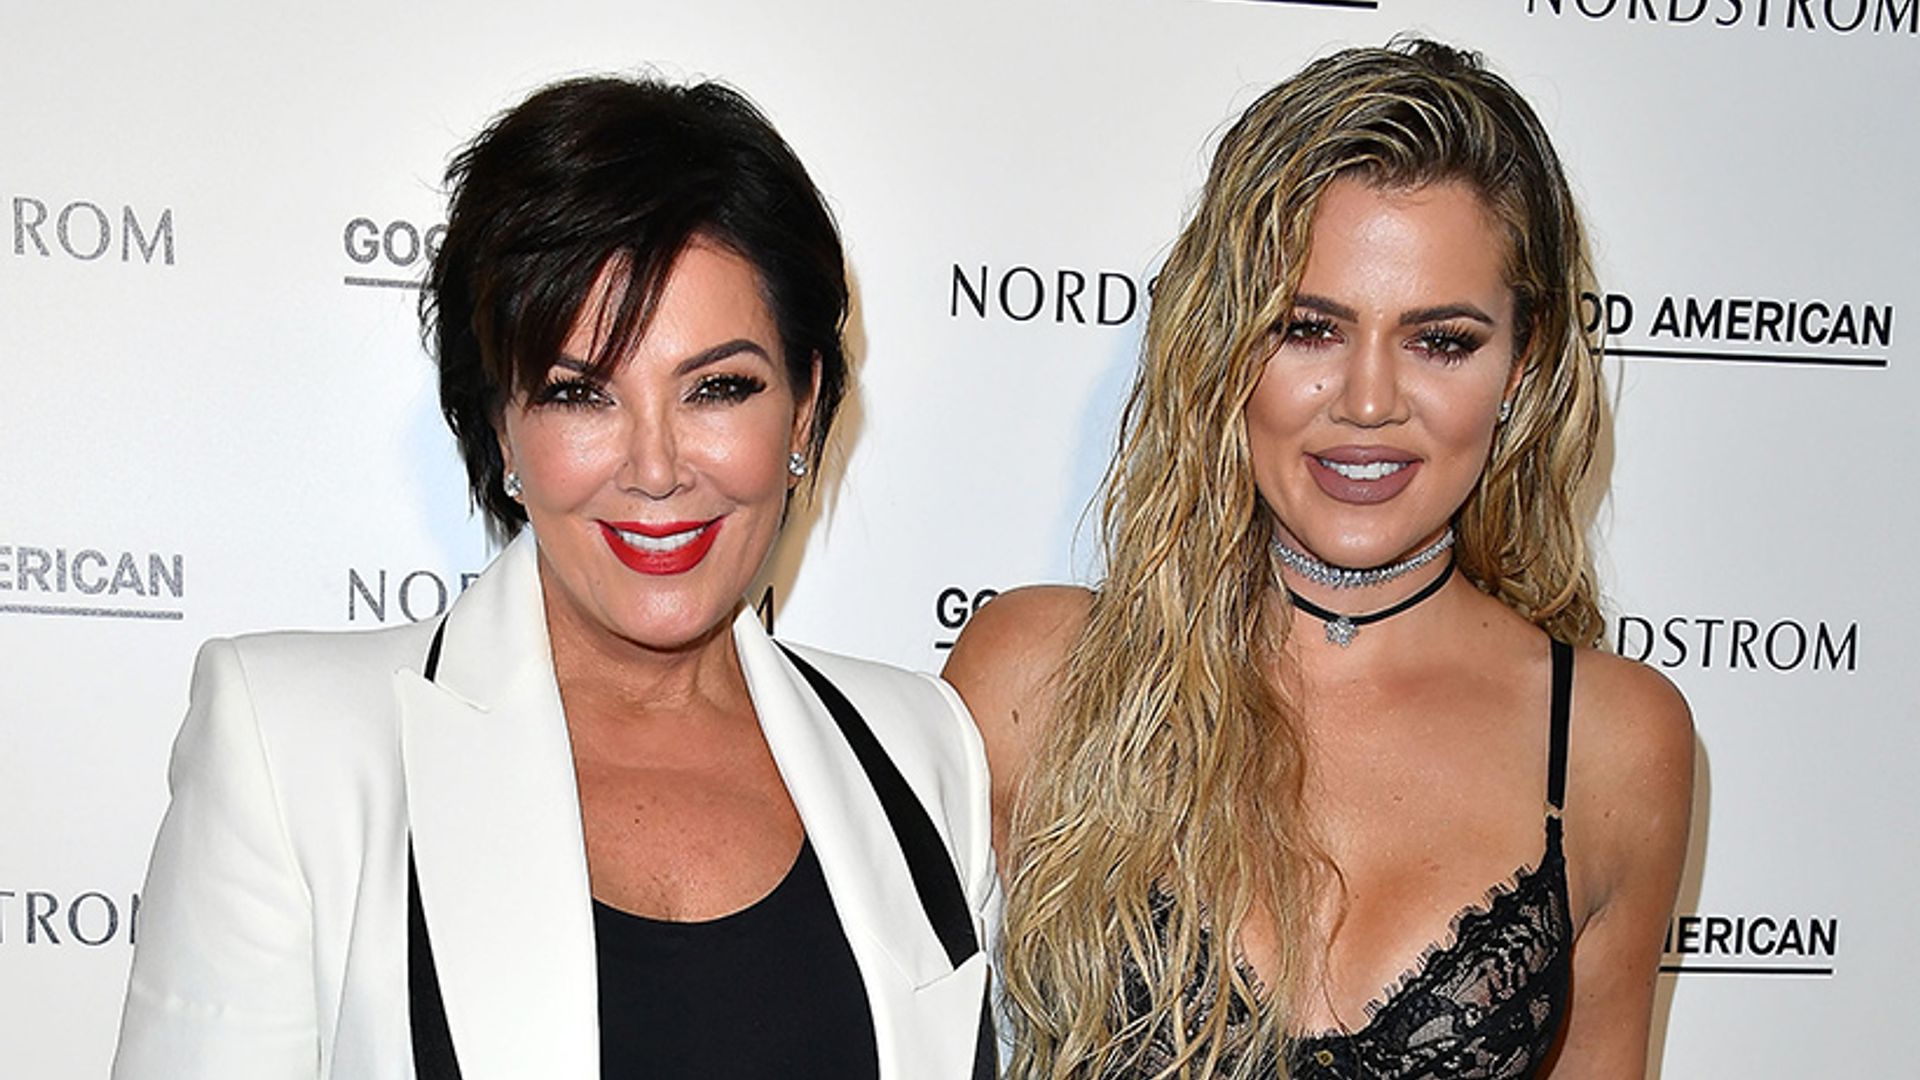 Kris Jenner reveals special meaning behind Khloe Kardashian's baby name